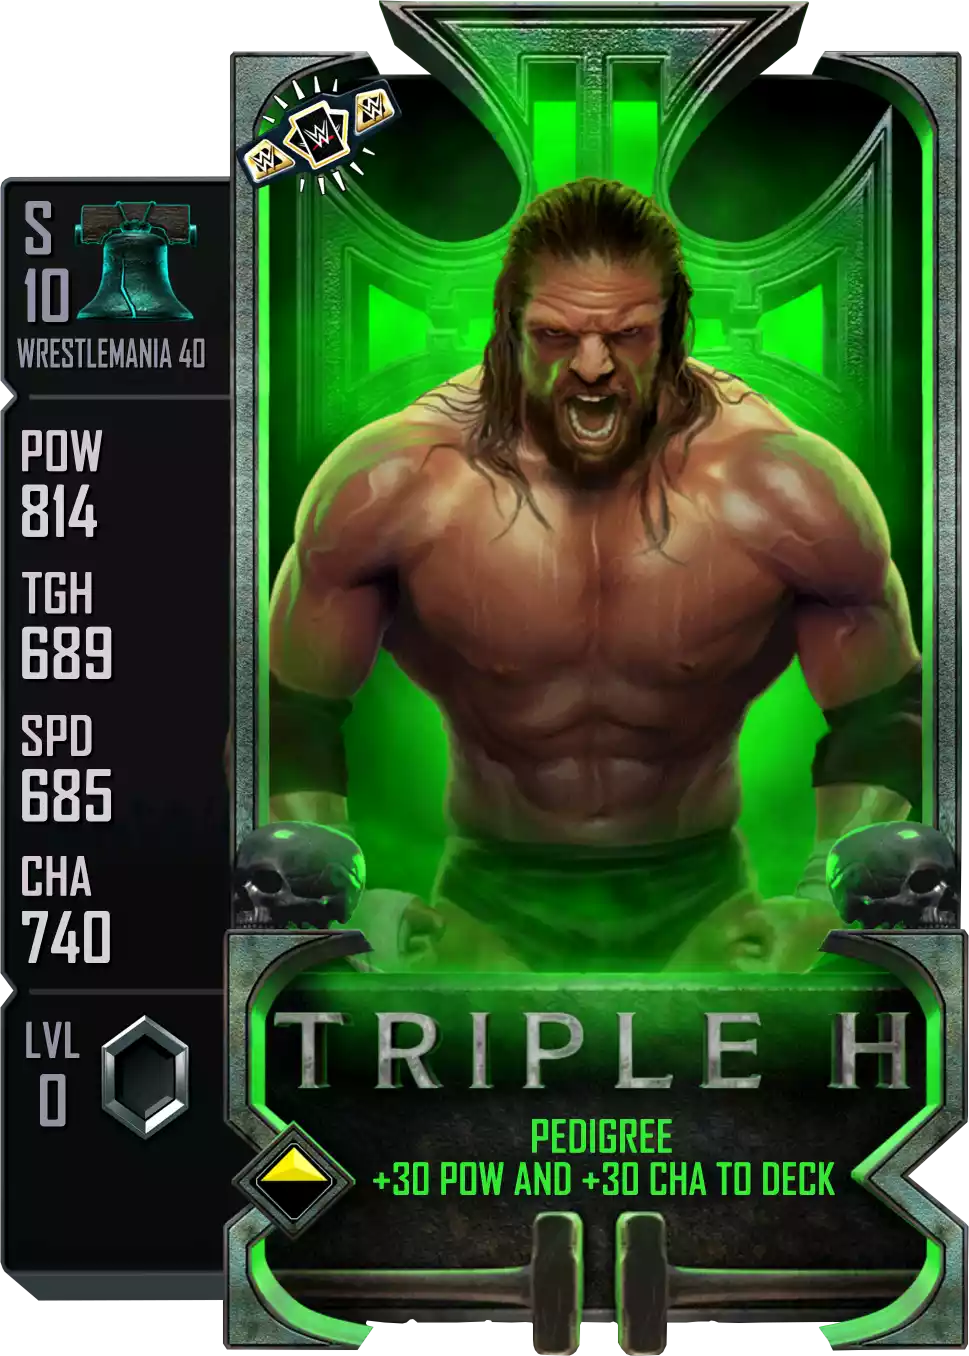 Wrestlemania 40, Triple H, Special Edition Battle Pass Card from WWE Supercard